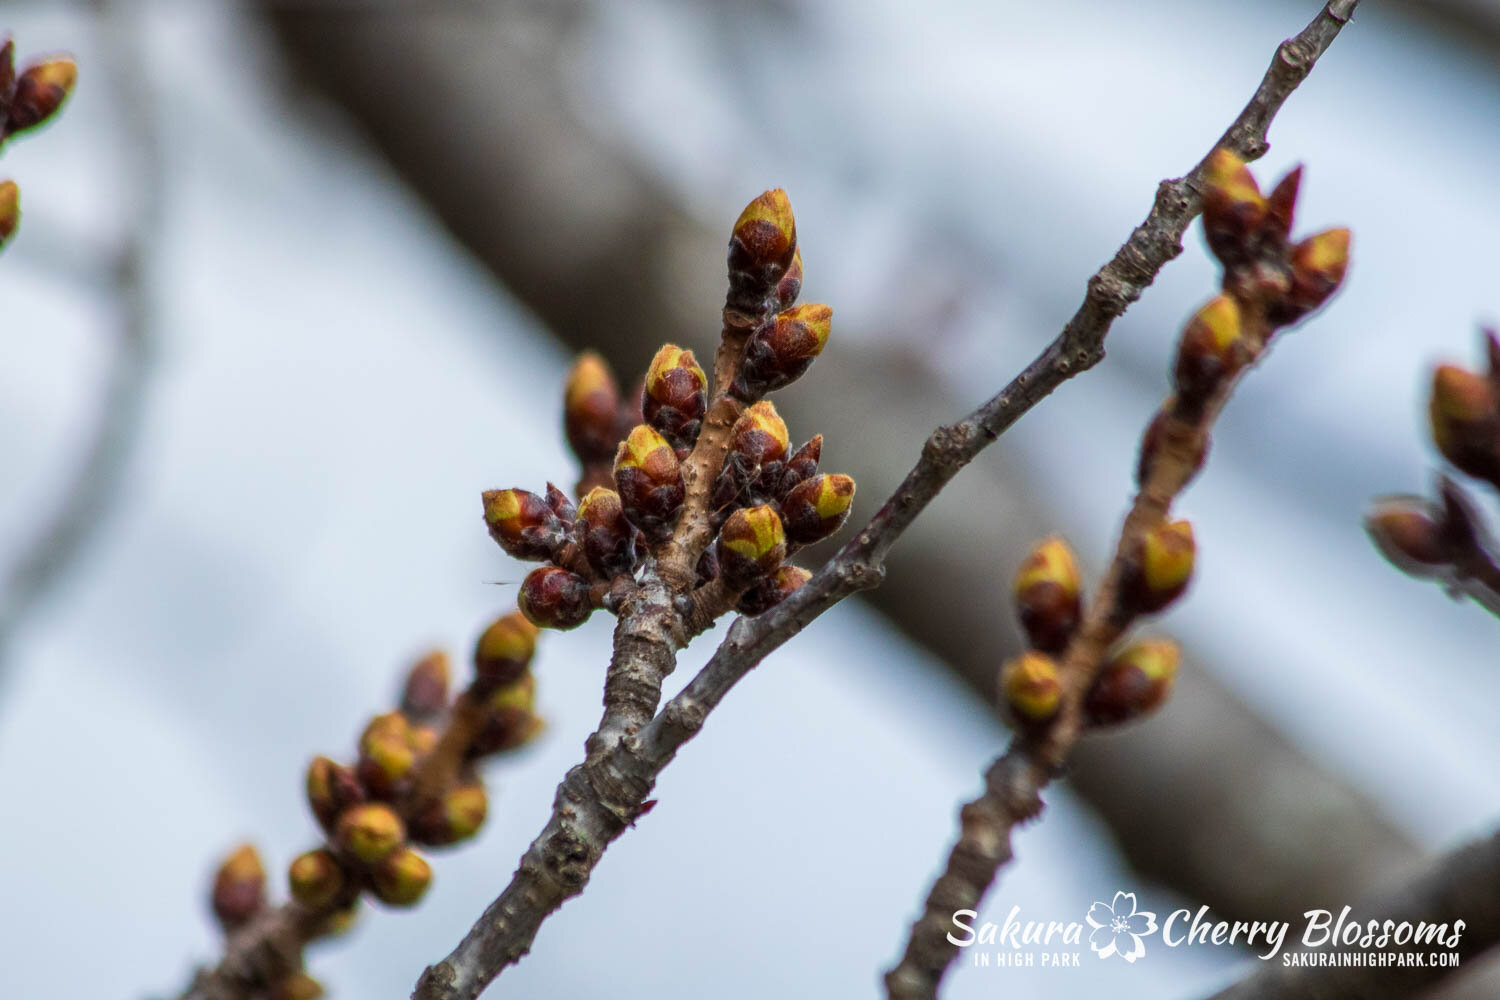 Sakura Watch March 27, 2024 - Cold and snow slowed progress by keeping the buds in Stage 2, but the return of warmer weather will keep things moving along into the next stages by next week. A few factors helped the trees survive the cold - the temper